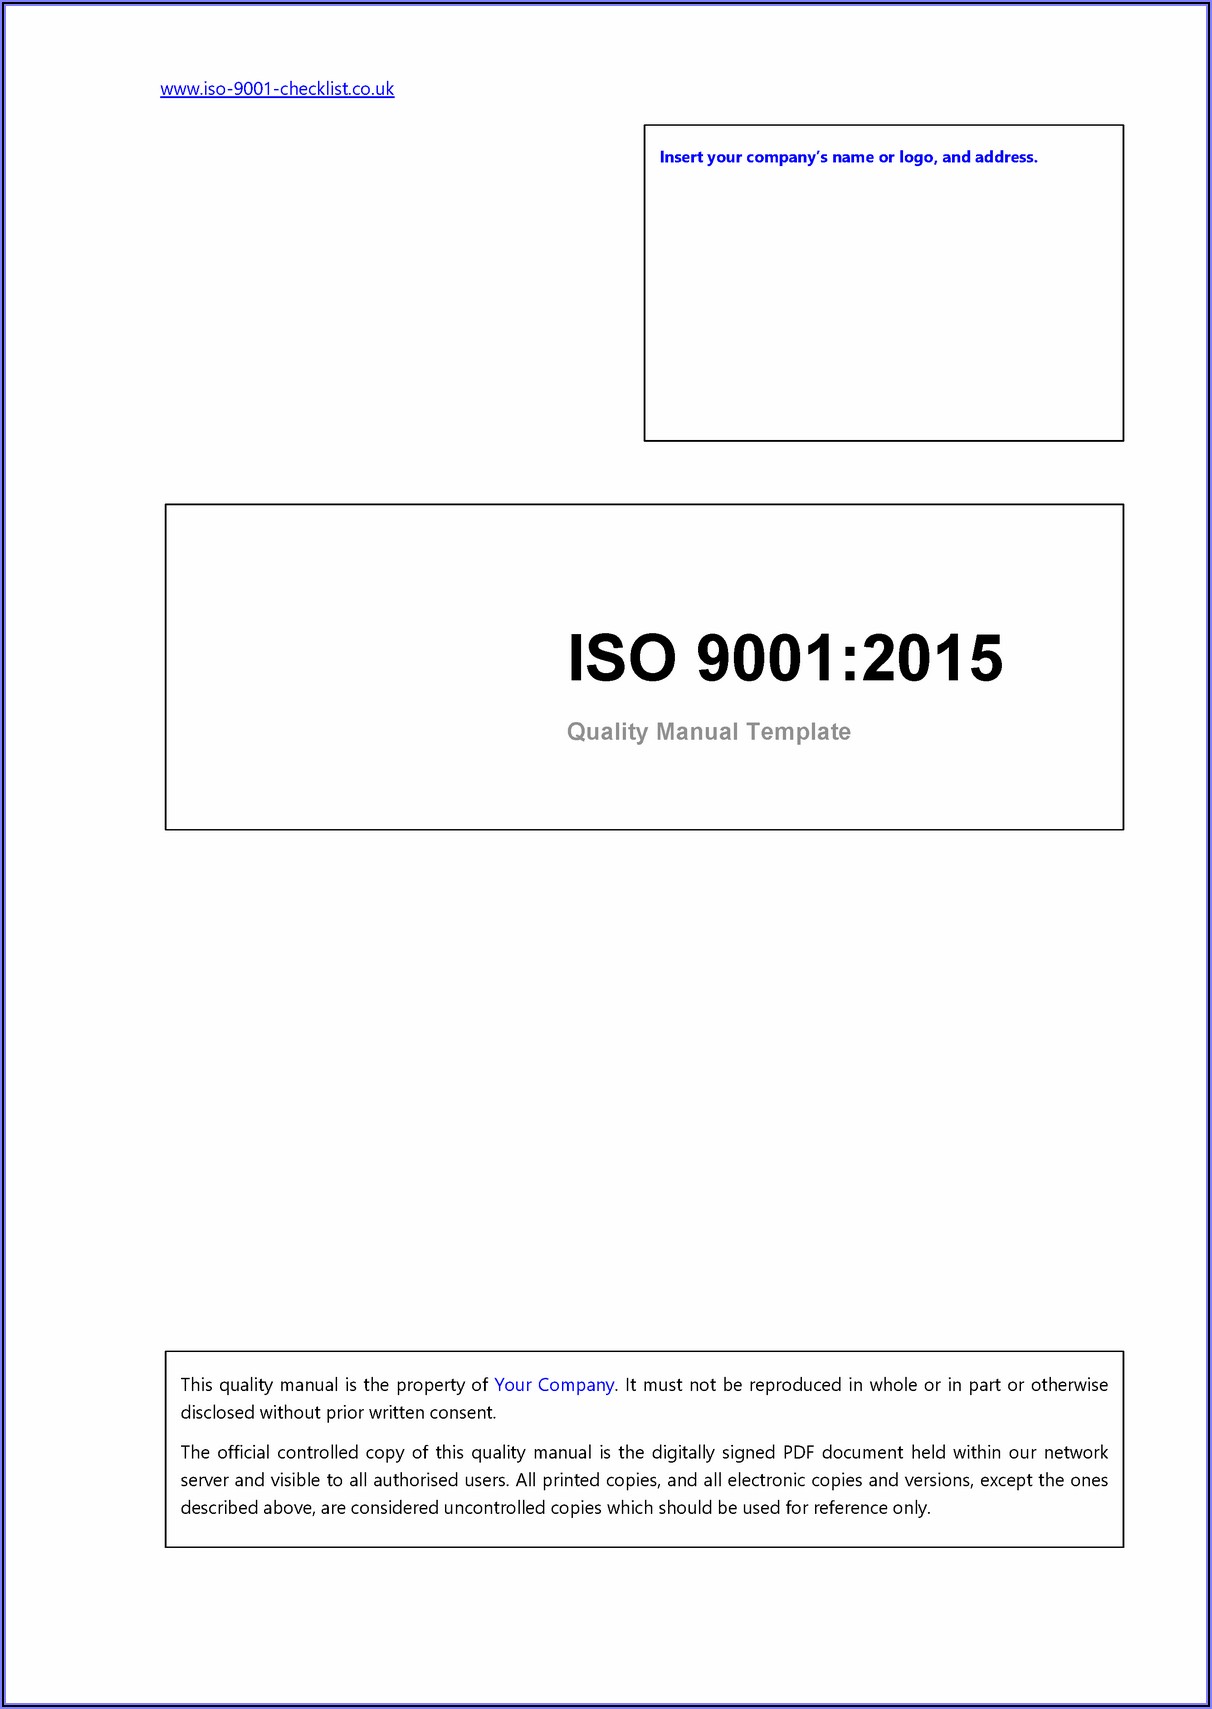 Iso Quality Manual Template